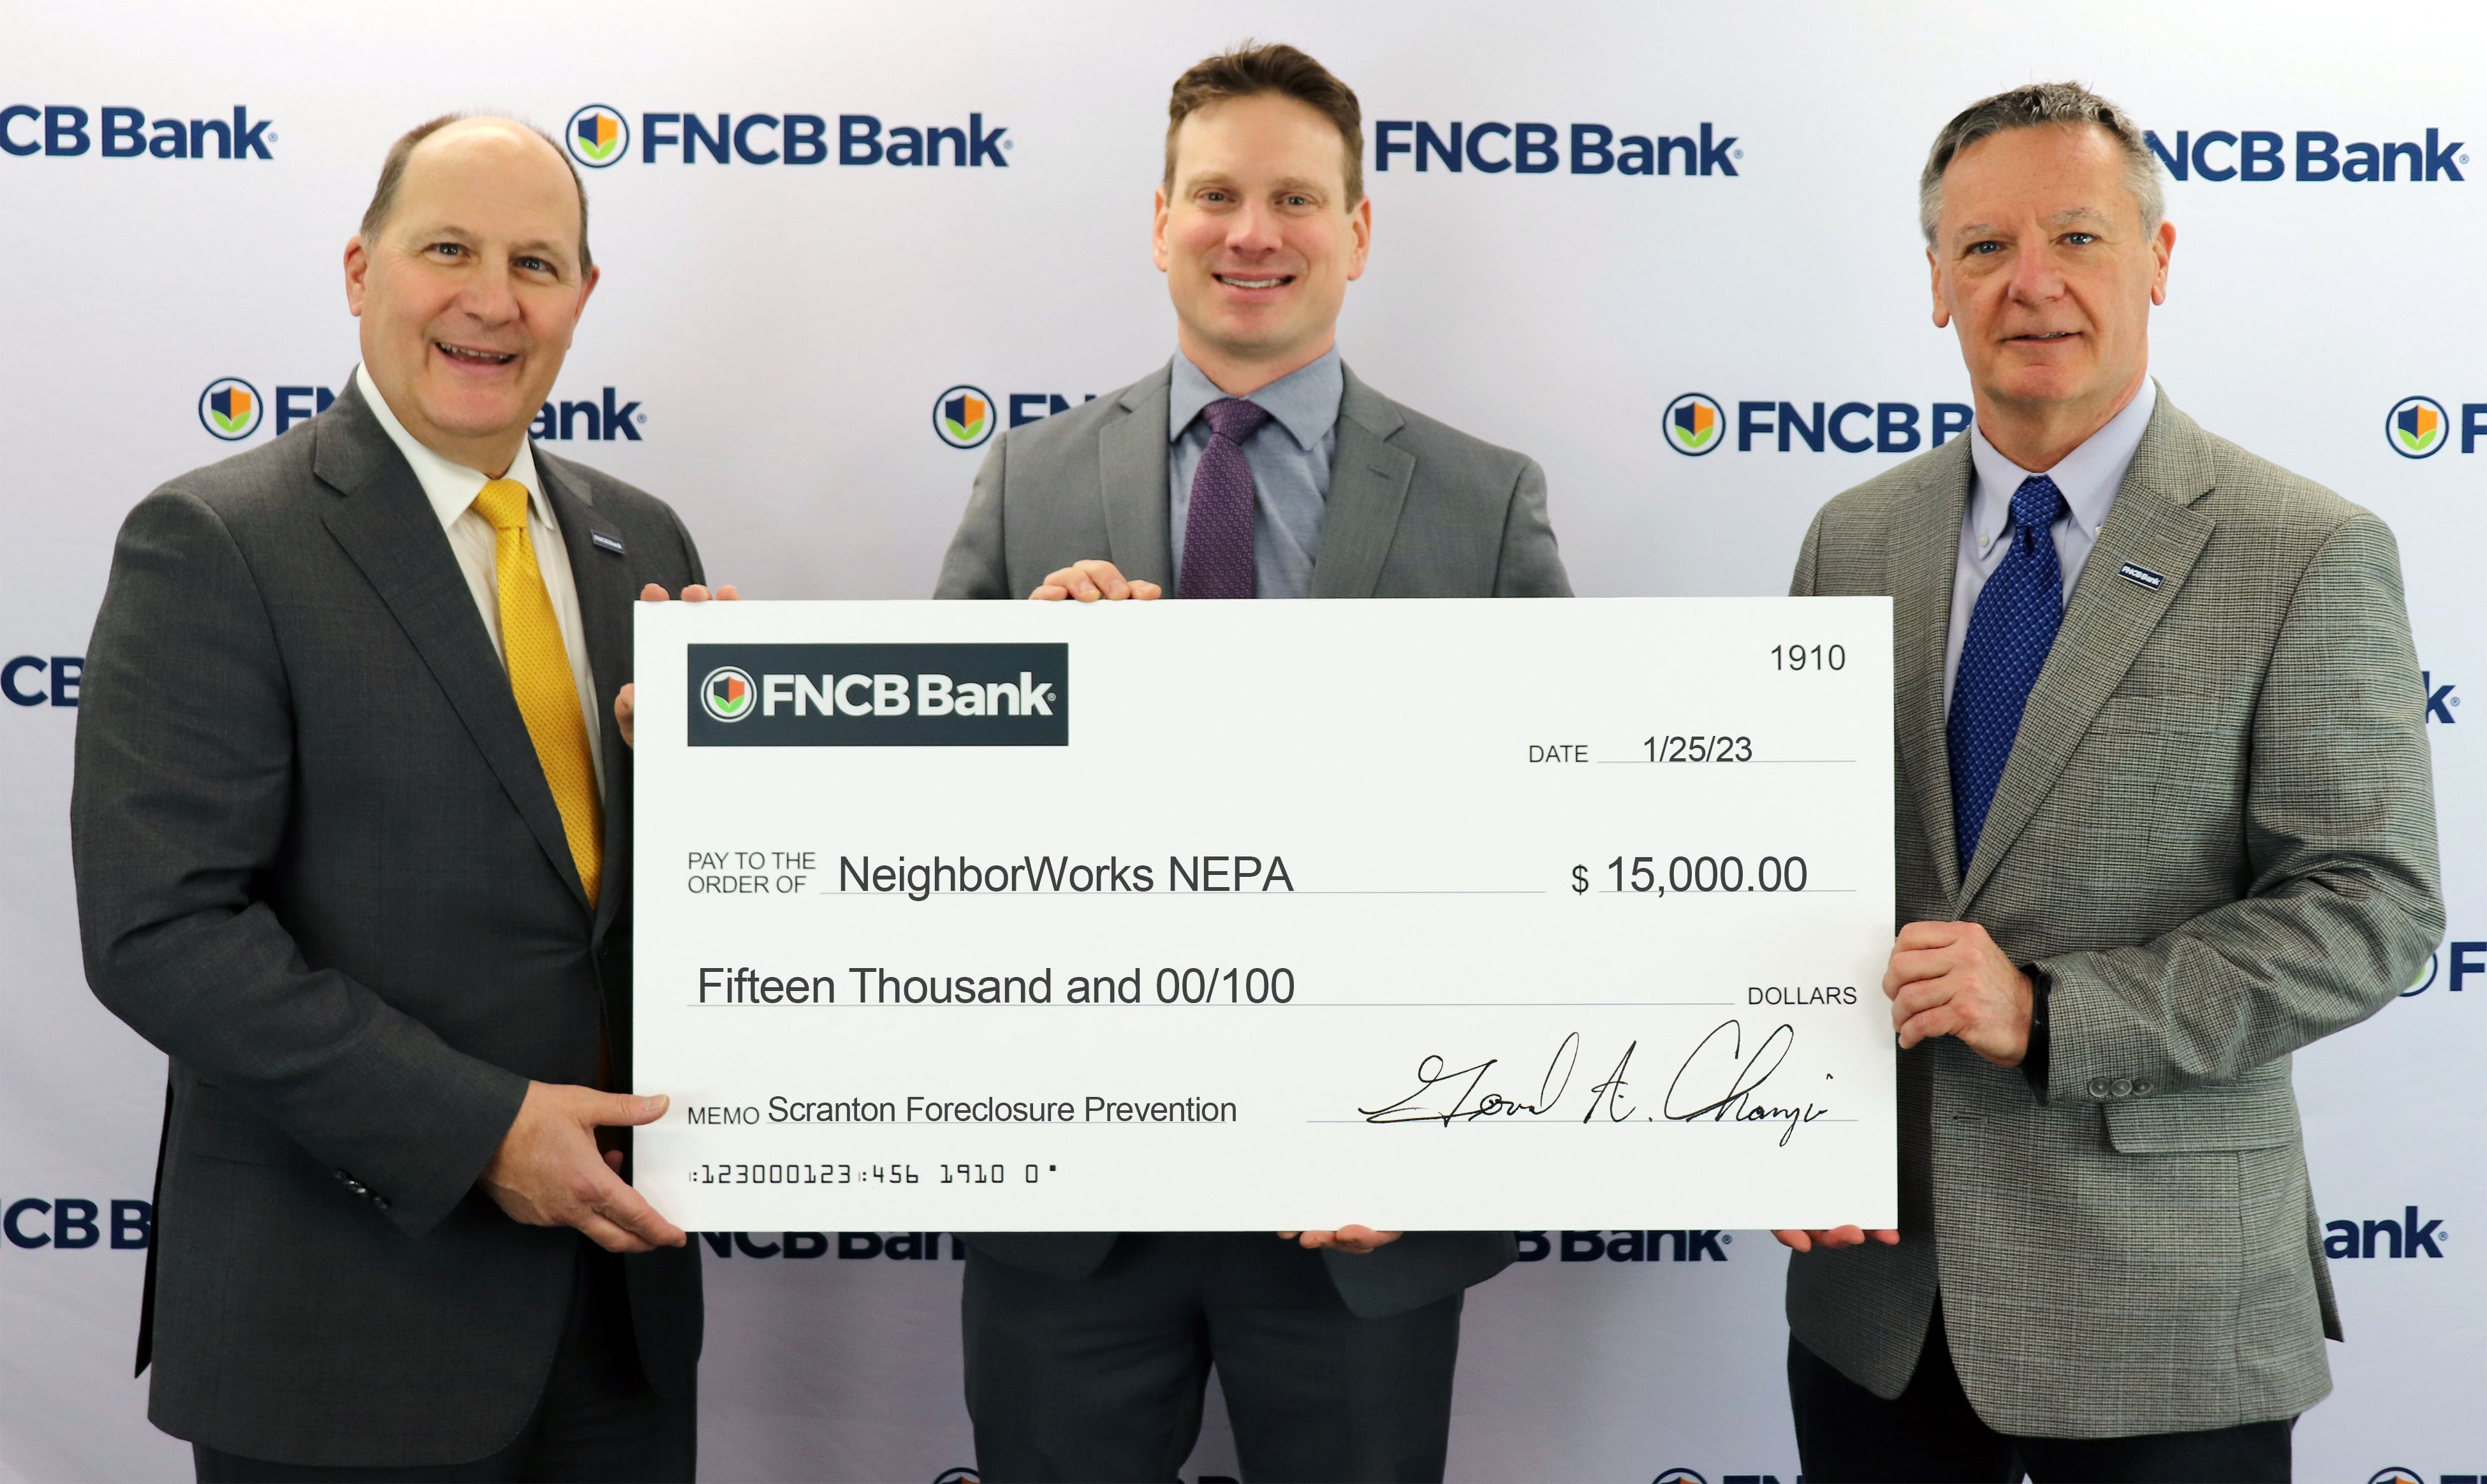 NeighborWorks receives contribution from FNCB Bank